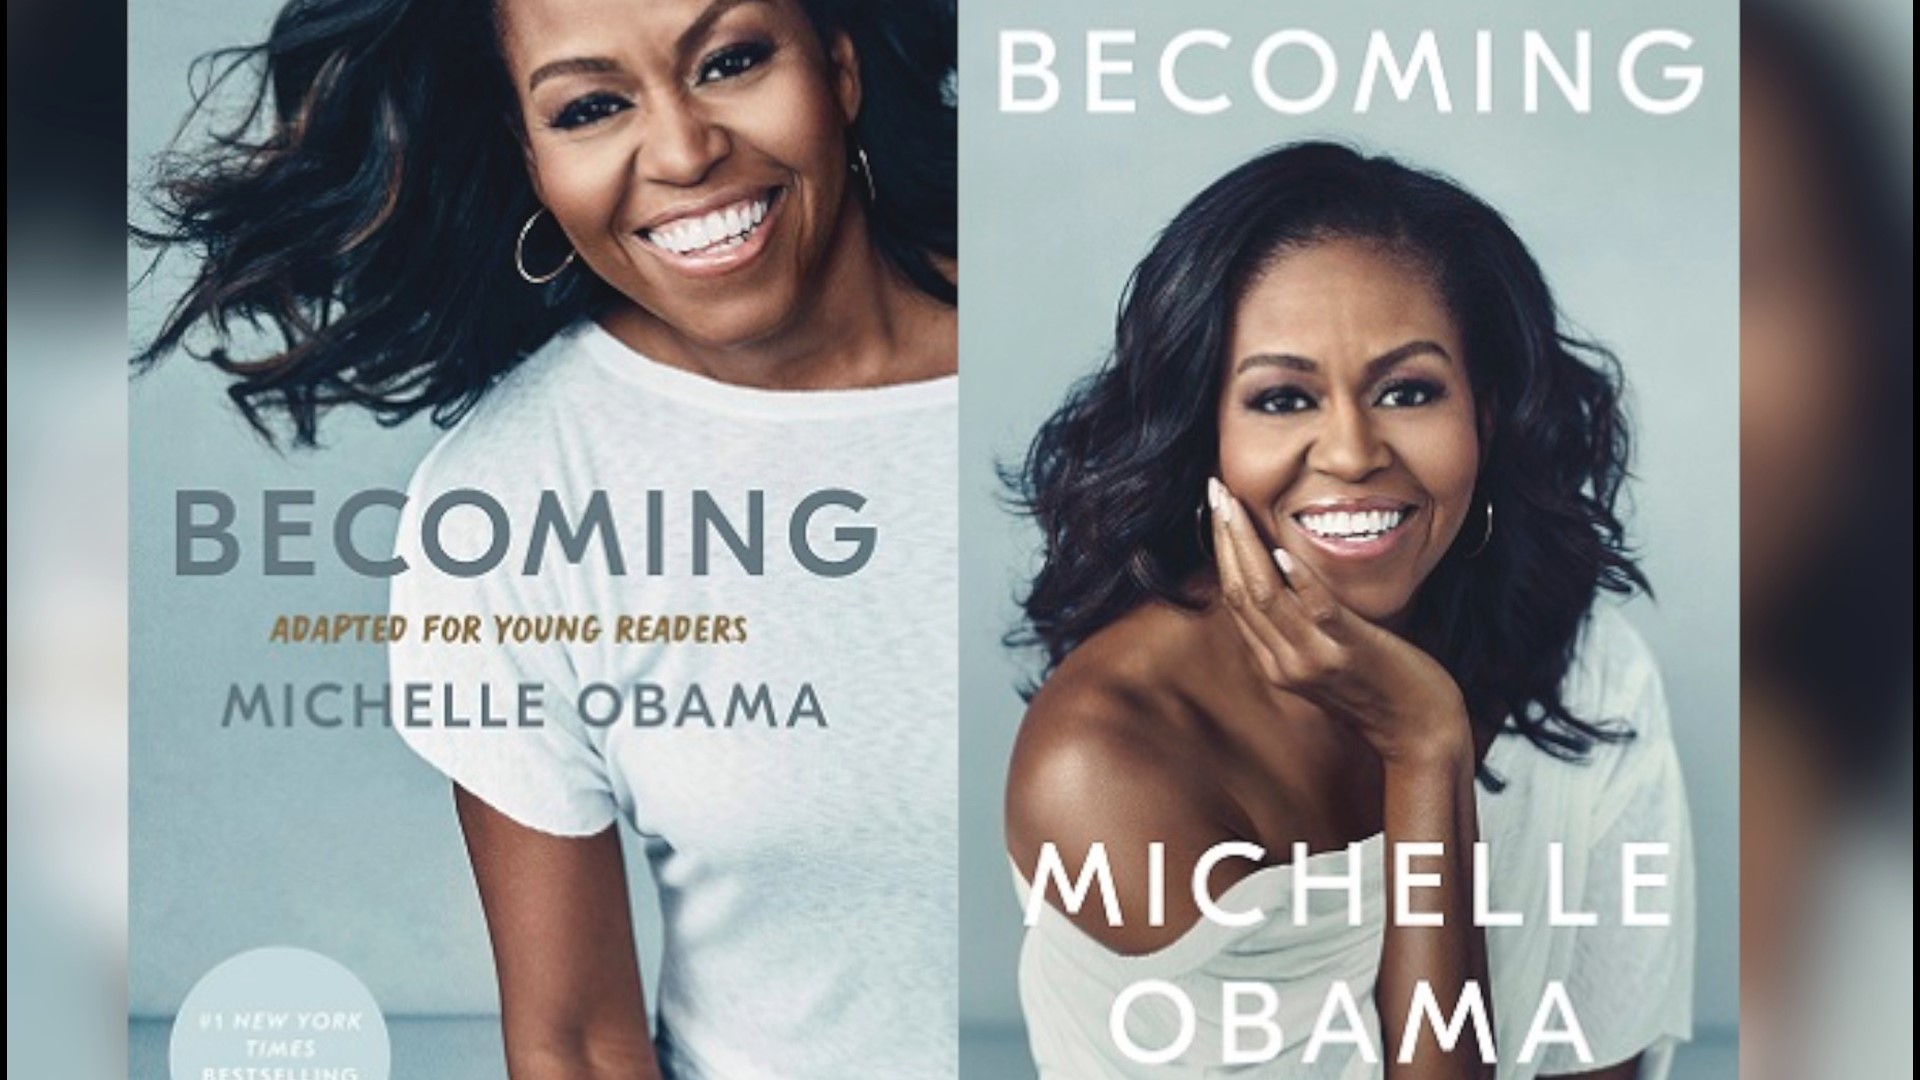 Younger readers will have the opportunity to read Michelle Obama's best-selling memoir 'Becoming' in a new edition written just for them. Veuer's Maria Mercedes Galuppo has the story.